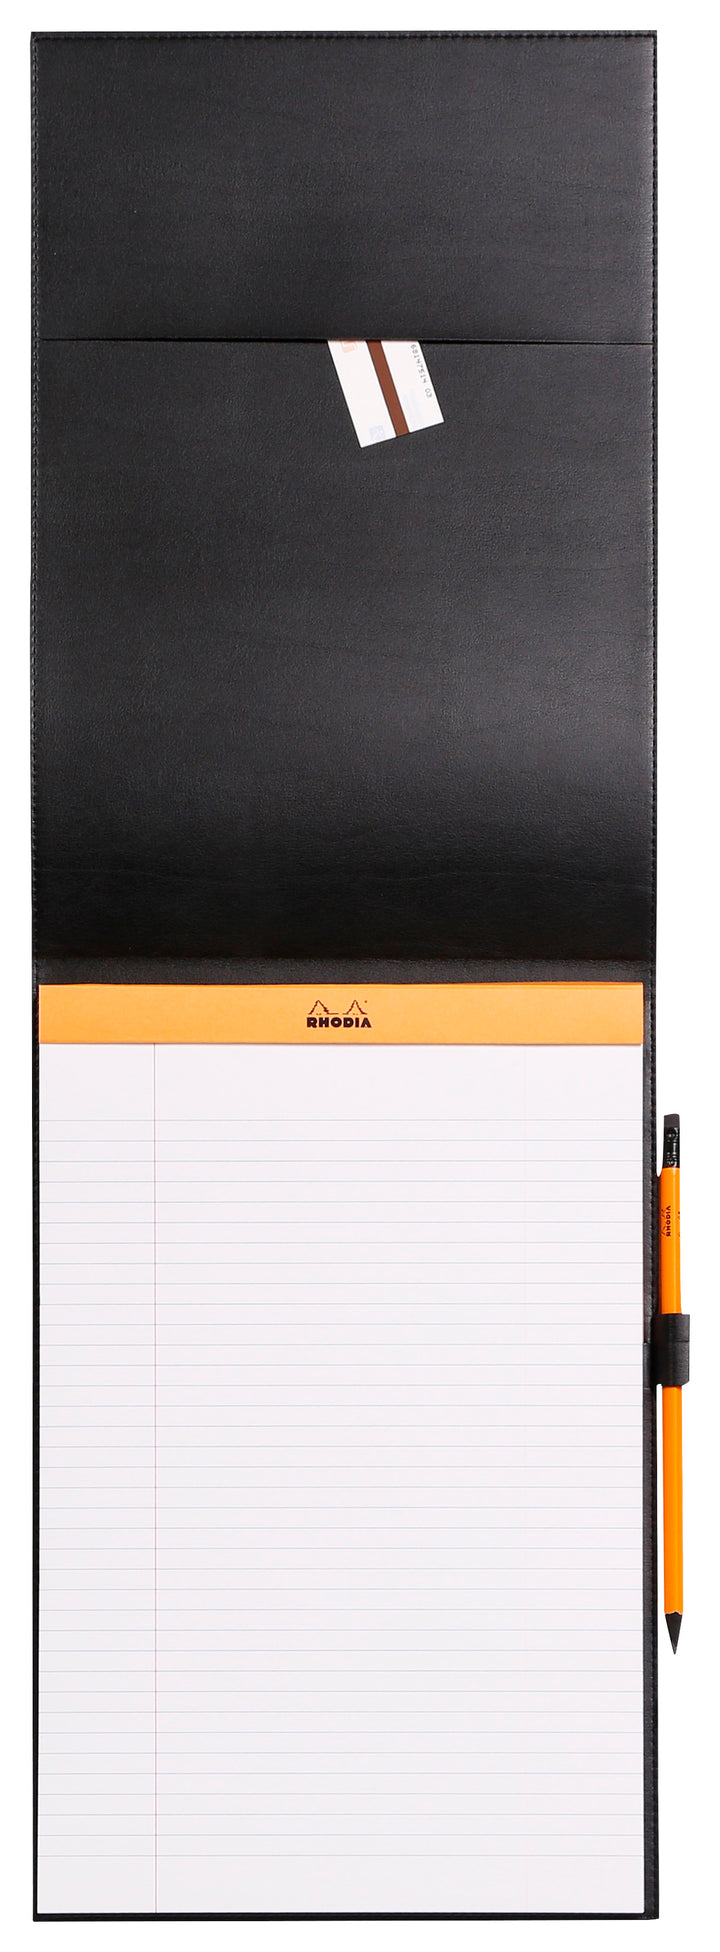 Rhodia Boutique Orange Stapled Line Ruled Notepad with Leatherette Cover - A4+